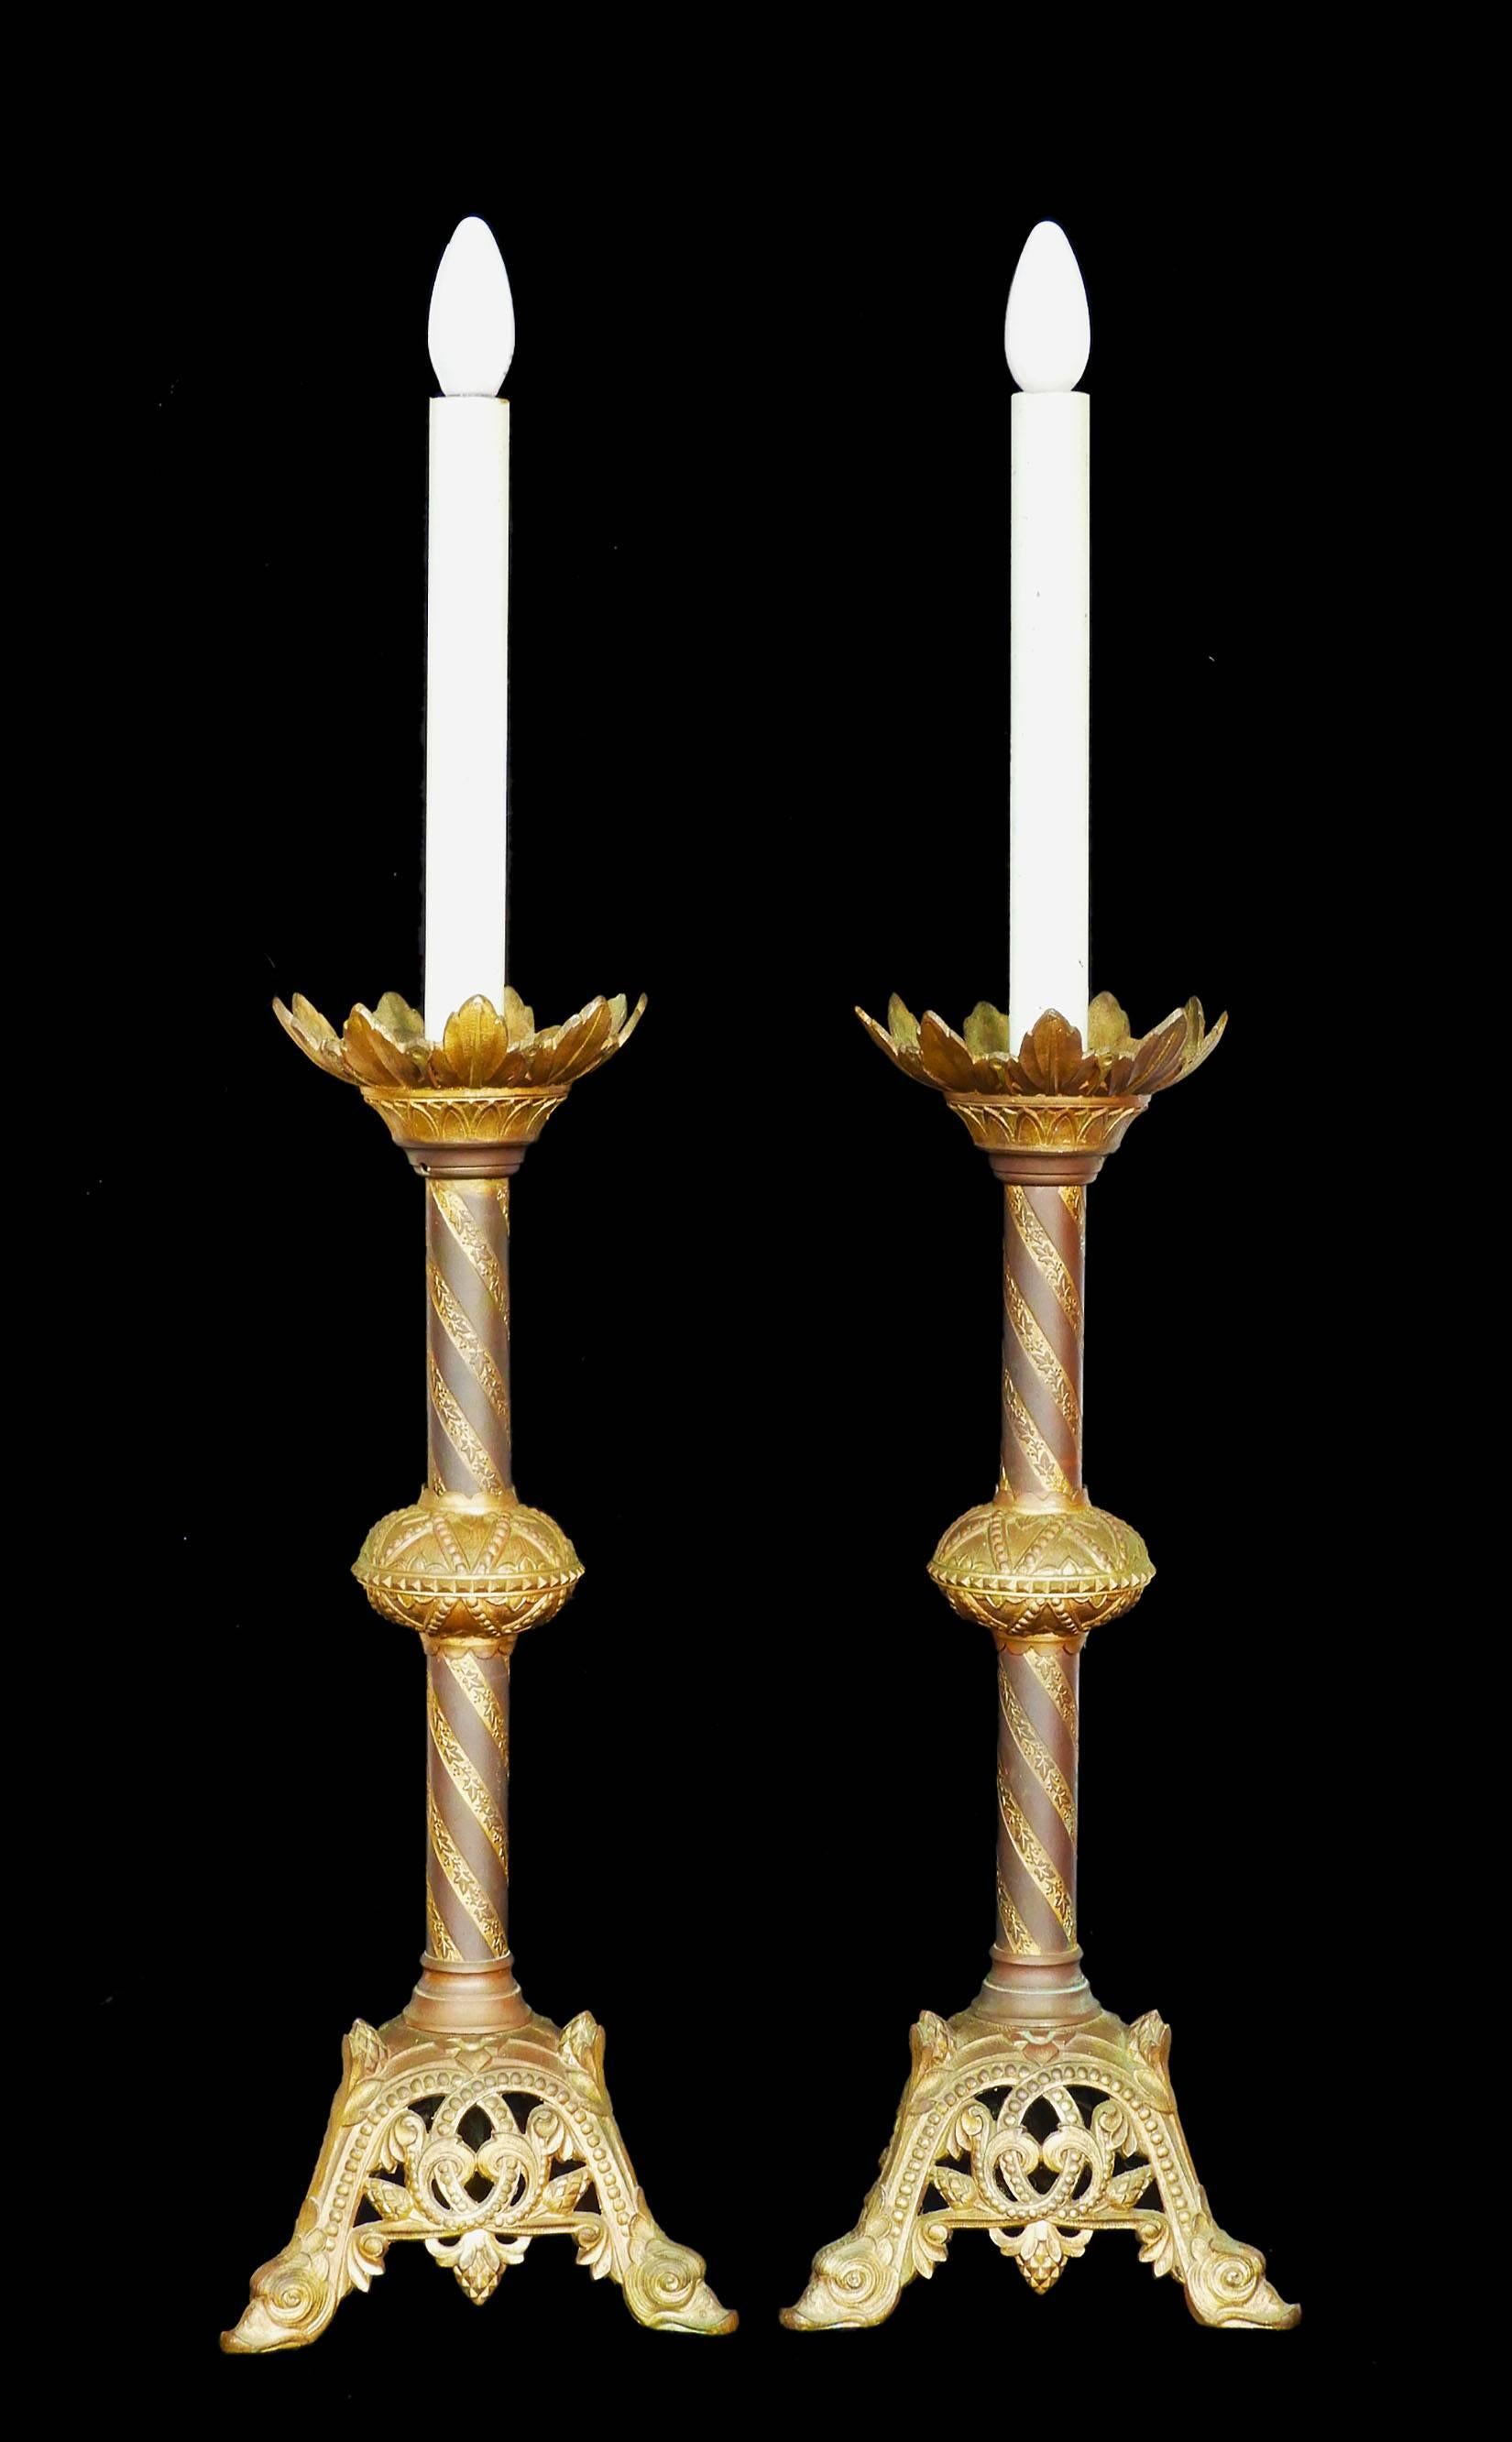 Pair of candlestick lamps French church Gothic Revival
Electrified
Gilded ormolu bronze
Good original antique condition with great patina
These will be rewired and tested to conform to UK & European or USA standards. Or for your country or other